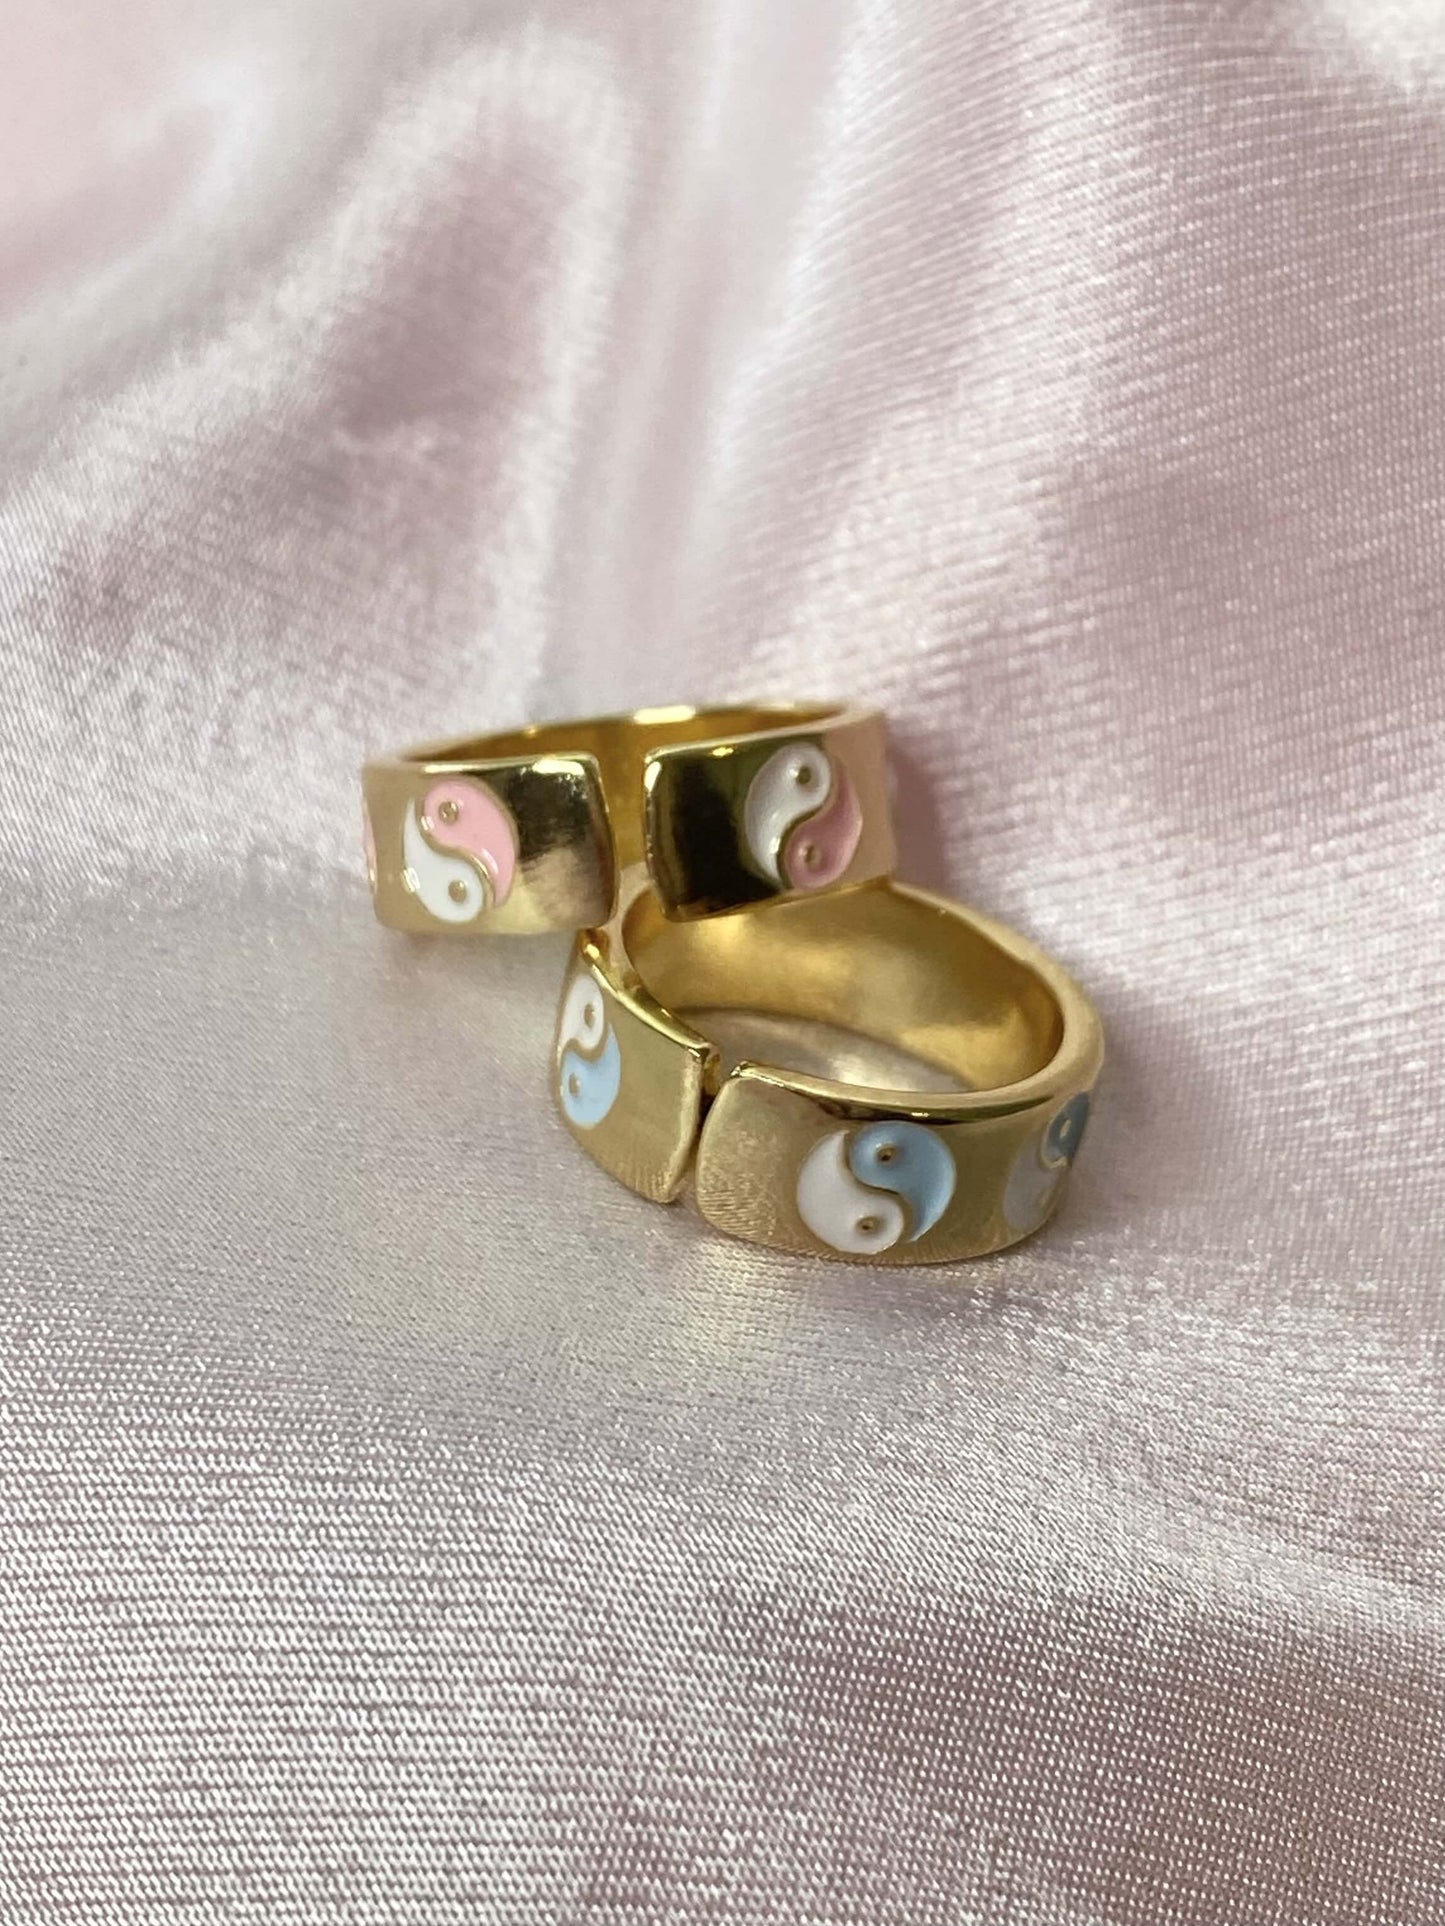 Load image into Gallery viewer, Balanced Babe Ring - Luna Alaska Jewelry yin yang band ring adjustable colorful gold girly jewelry
